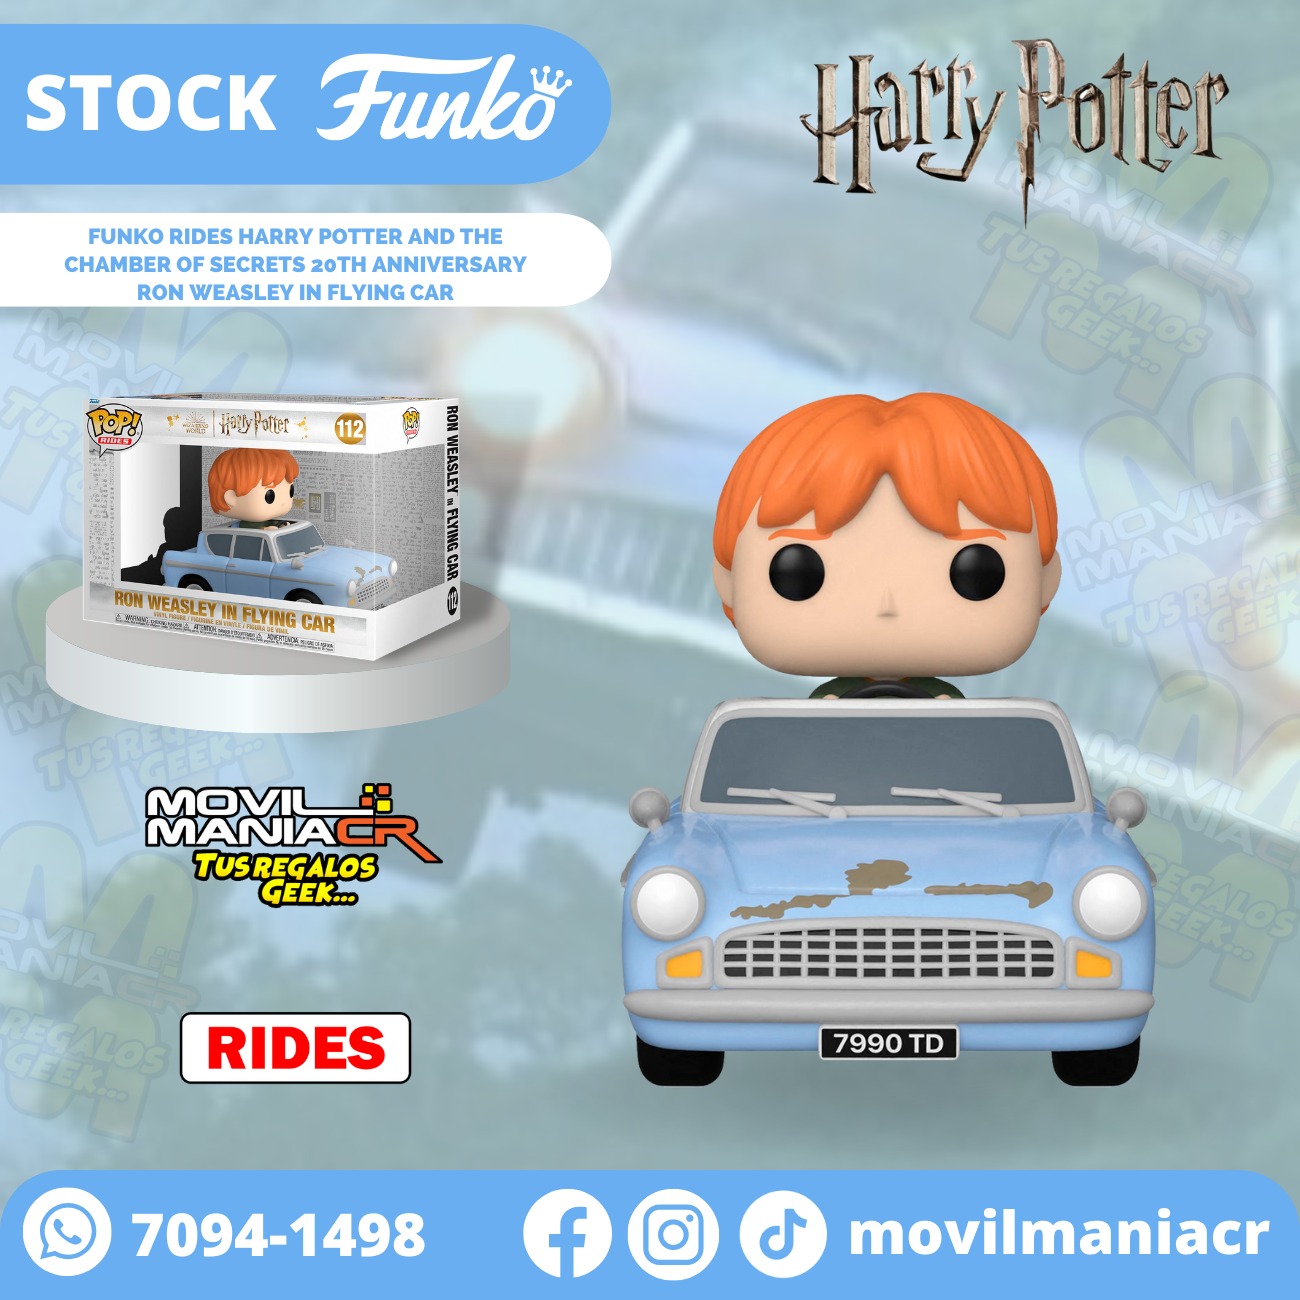 Funko Pop Harry Potter and the Chamber of Secrets 20th Anniversary Ron Weasley in Flying Car #112